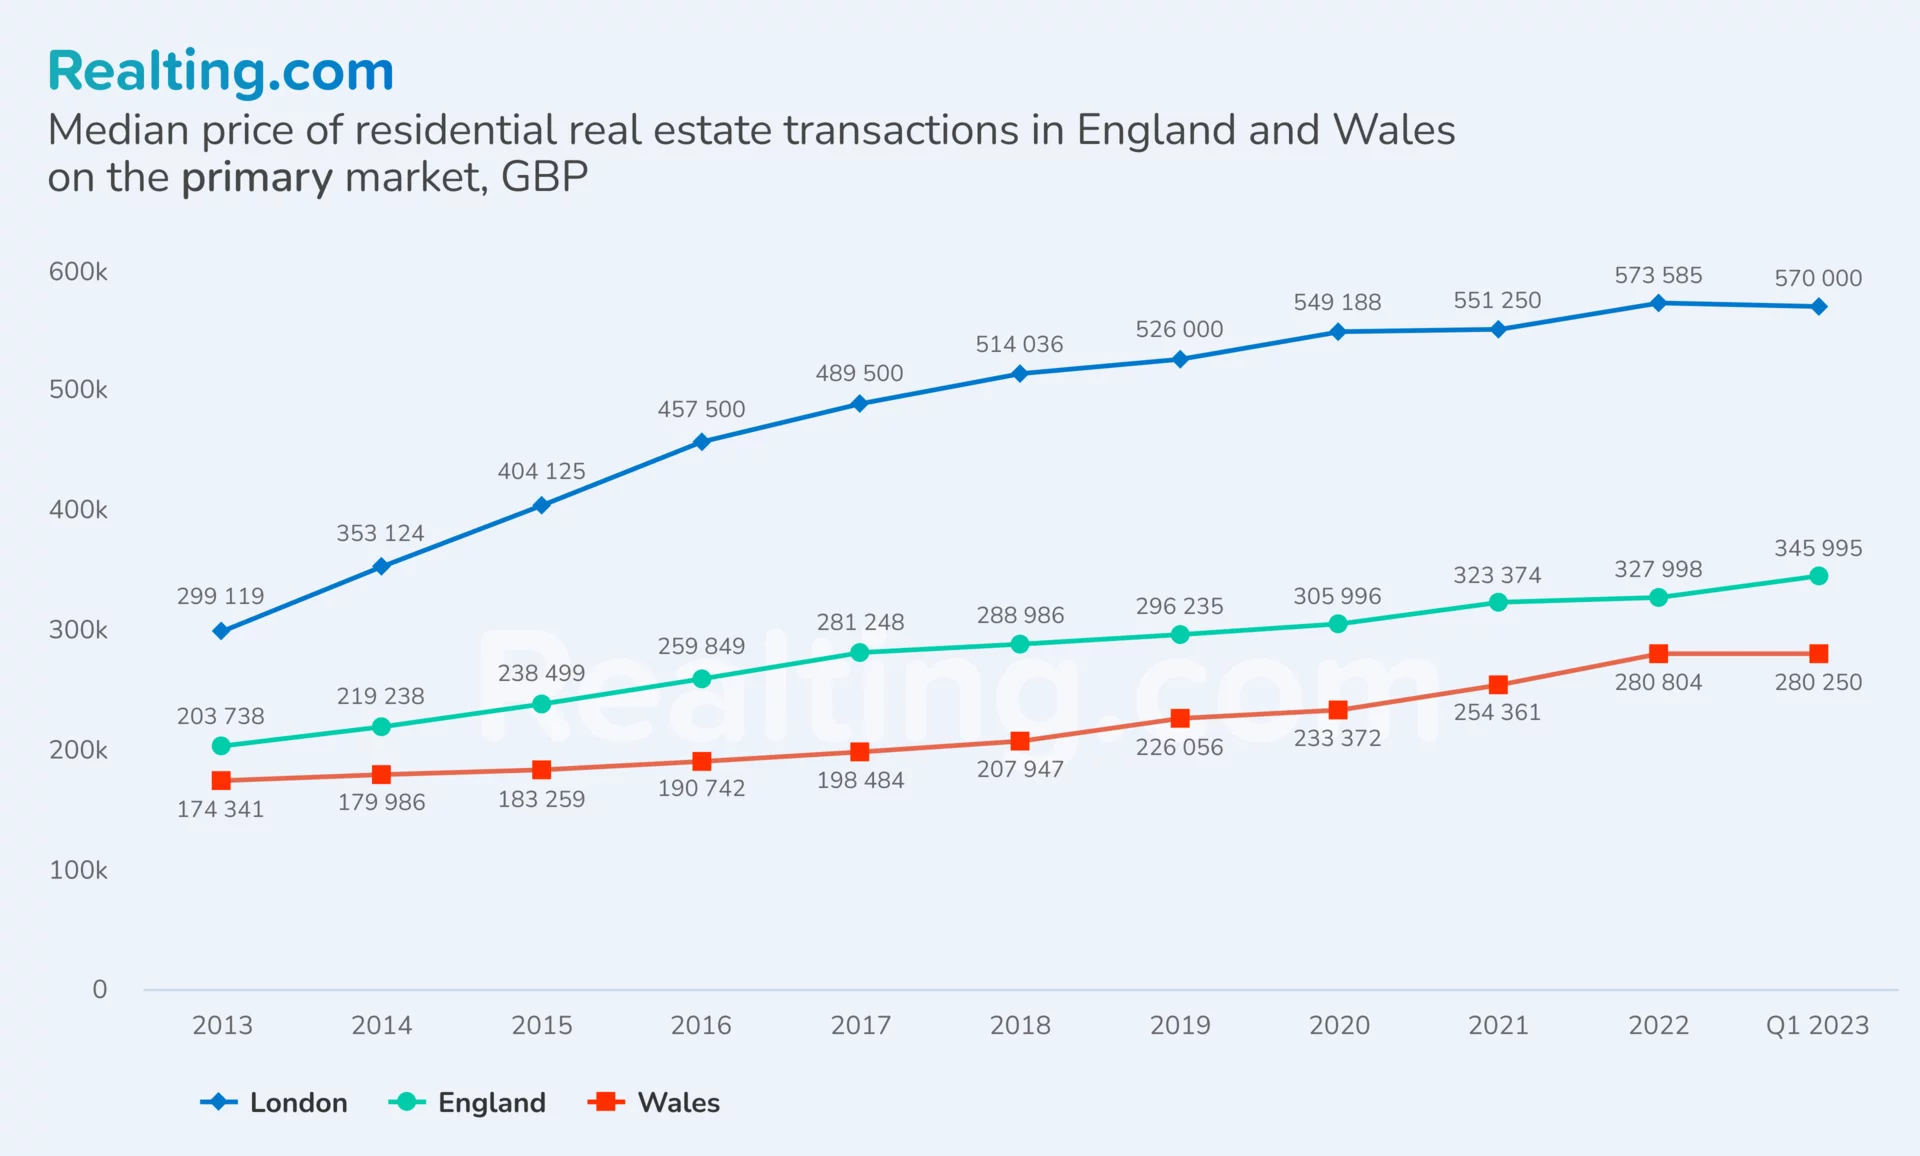 Median price of residential real estate transactions in England and Wales on the primary market